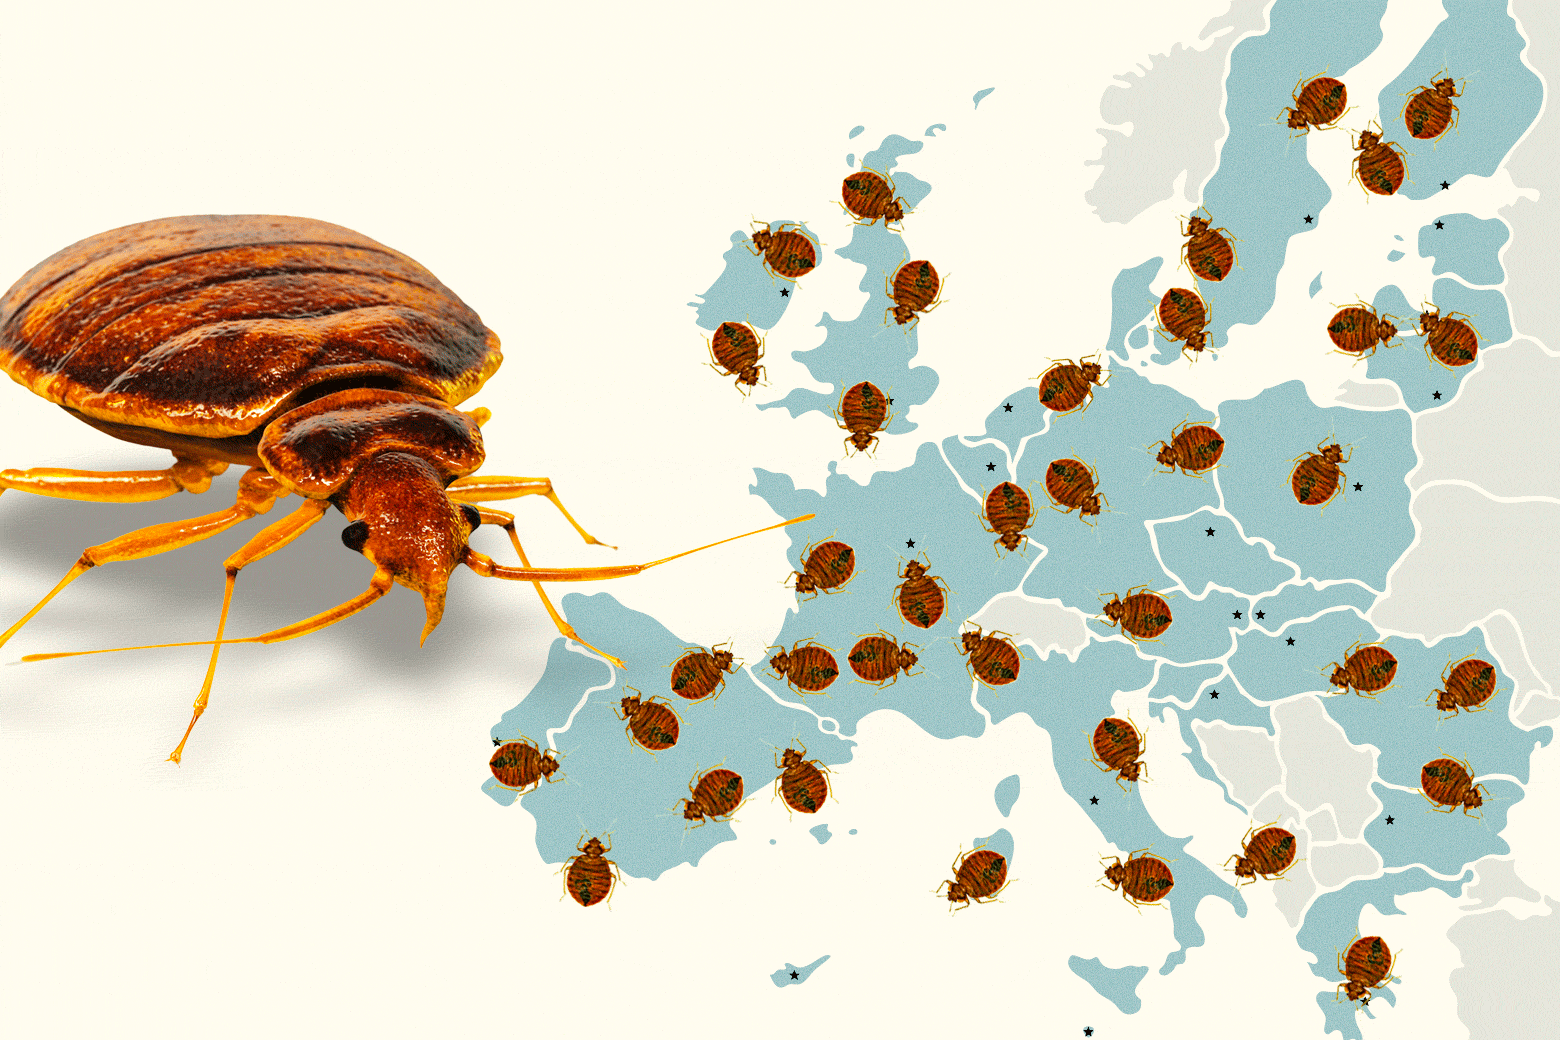 Bedbug Paris infestation: there's a reason everyone suddenly noticed the  bugs everywhere.